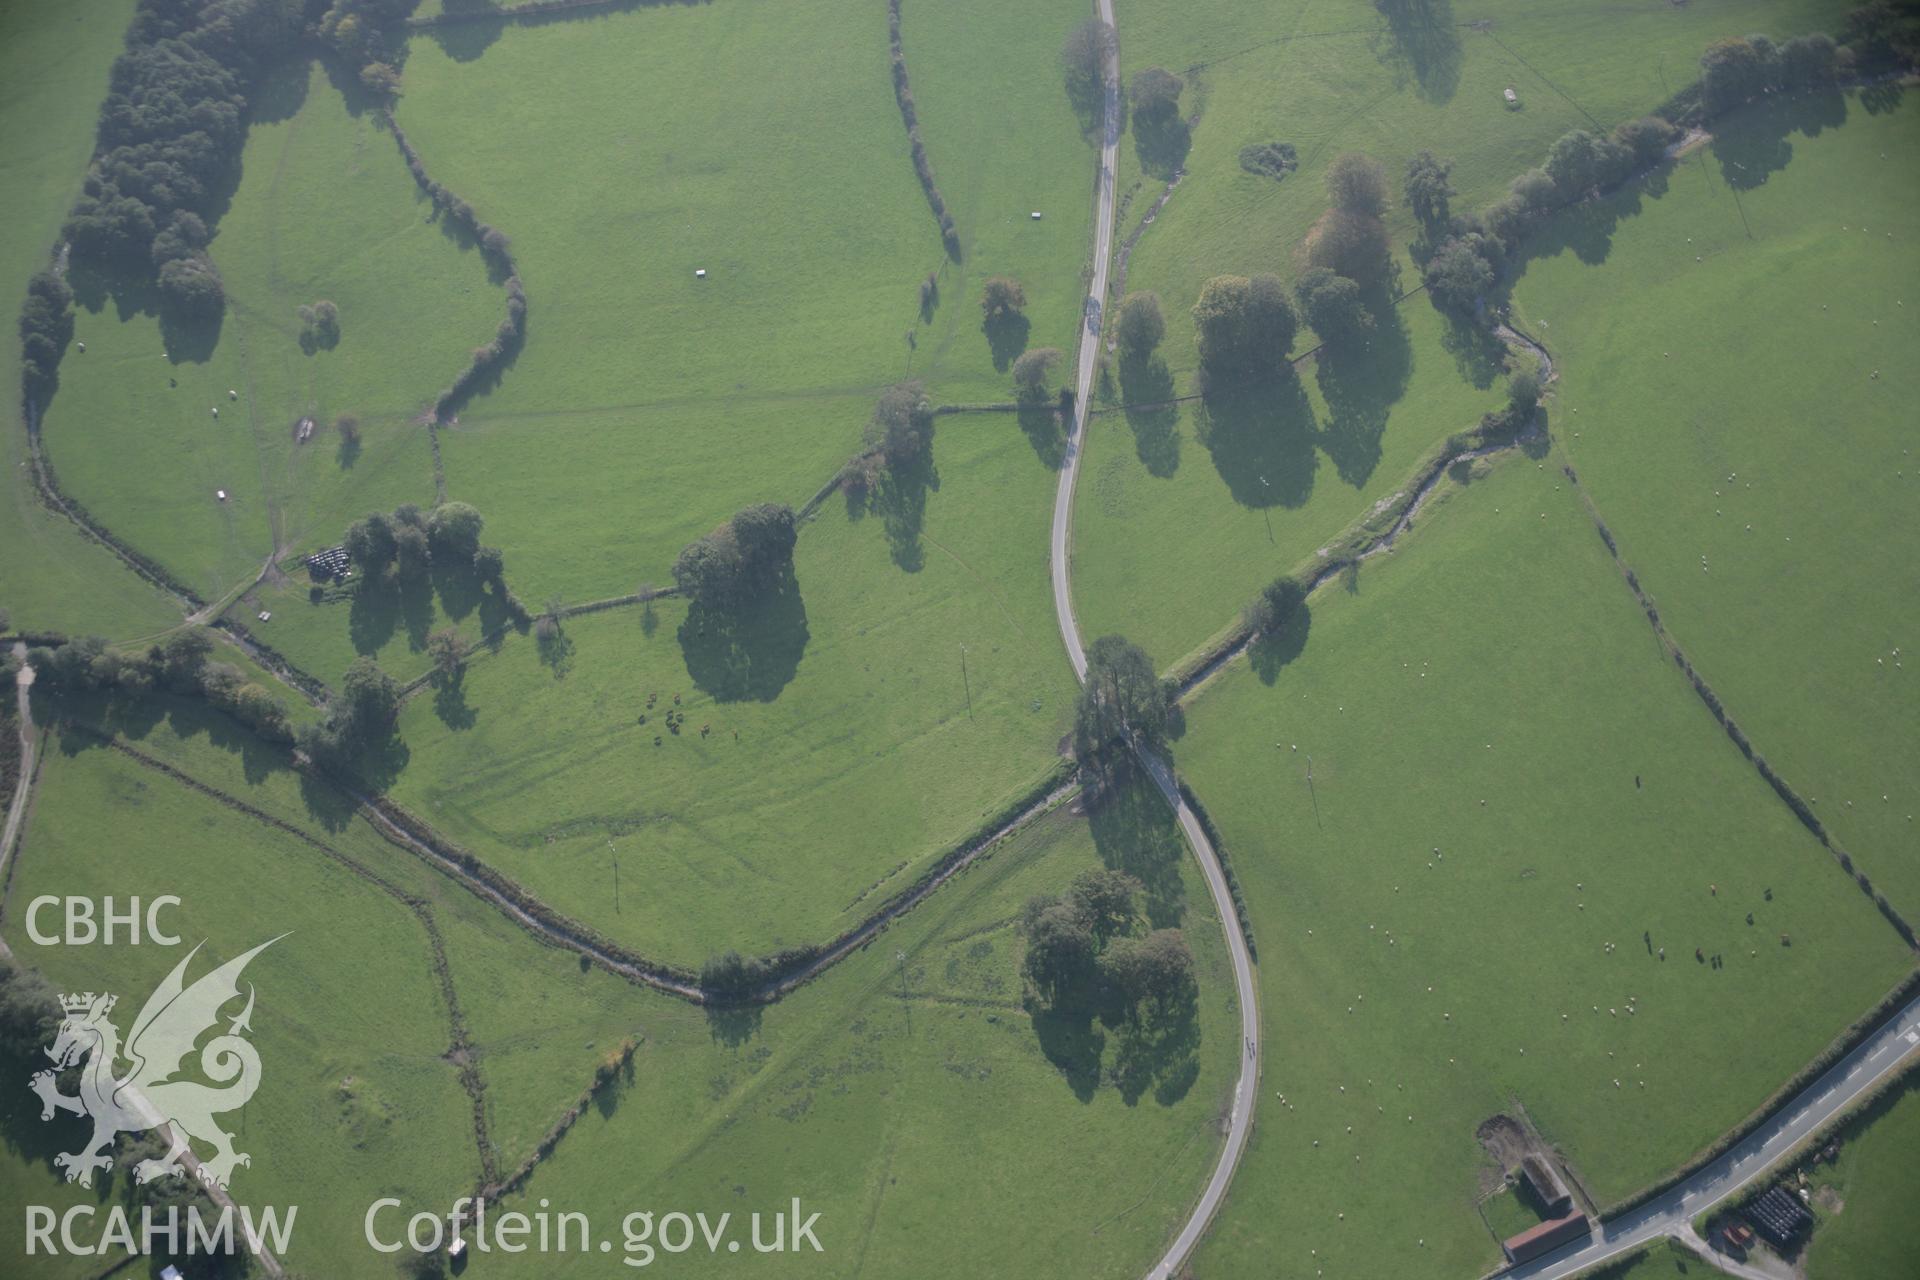 RCAHMW colour oblique aerial photograph of Tomen Las and surrounding earthworks from the north-west. Taken on 17 October 2005 by Toby Driver